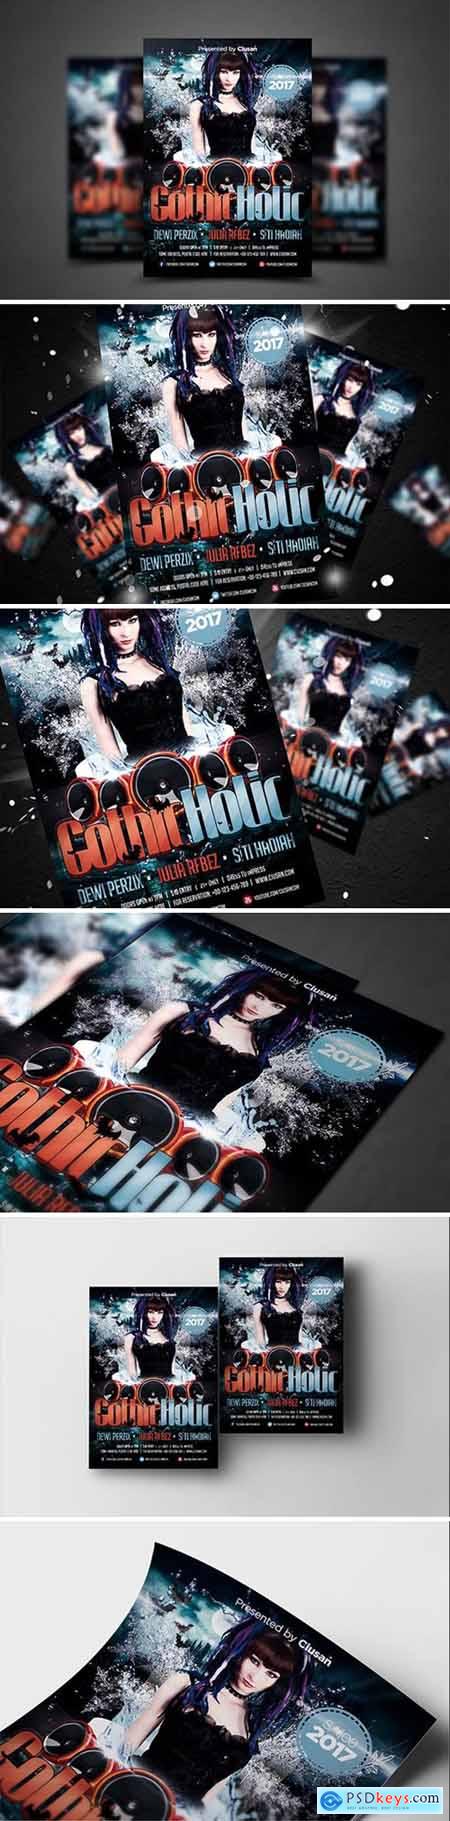 Gothic Holic Flyer Template 3940042